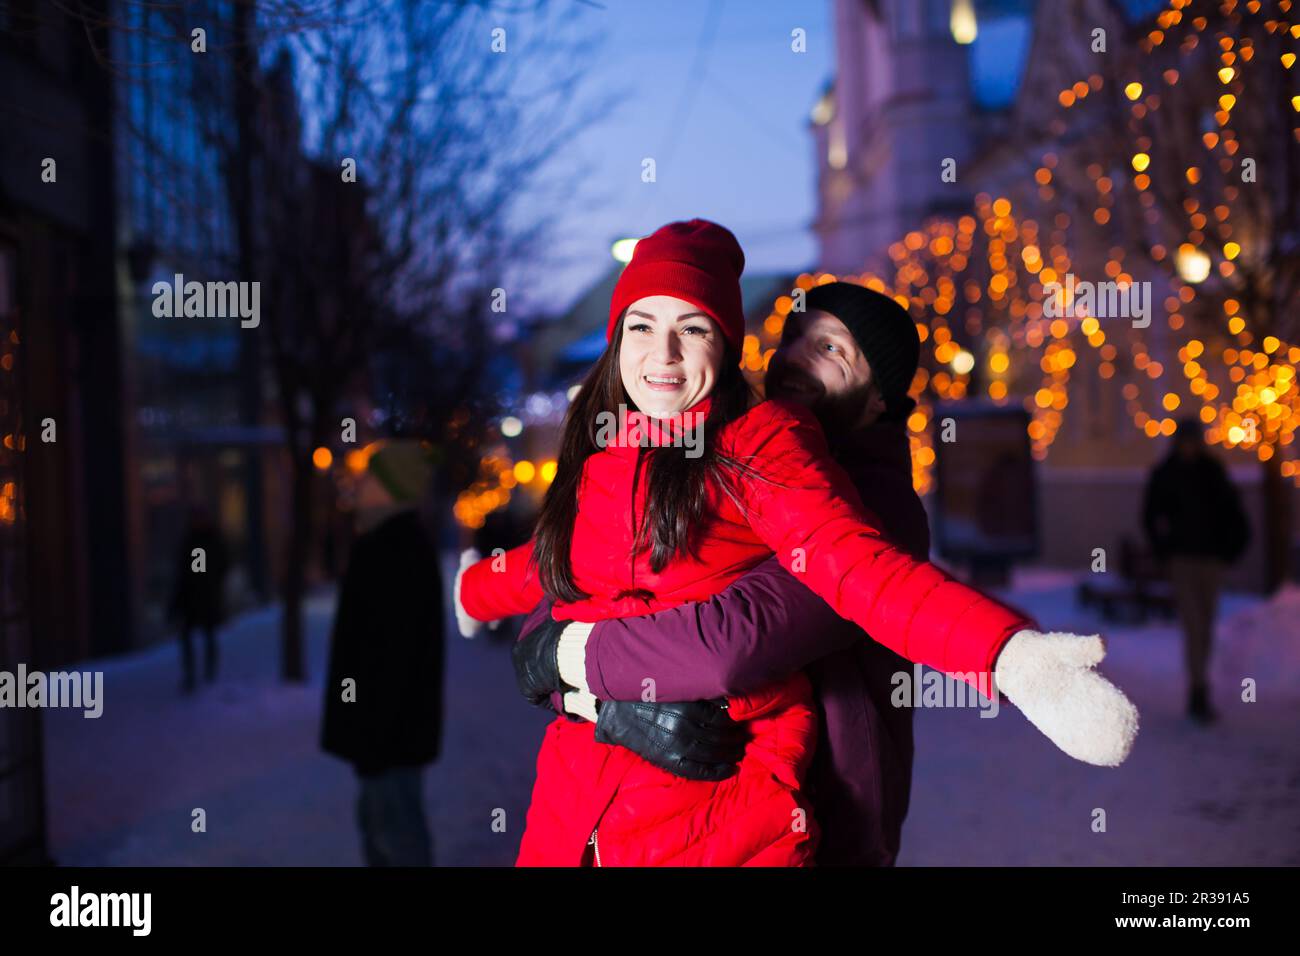 Marry couple standing in bright lights outdoors Stock Photo